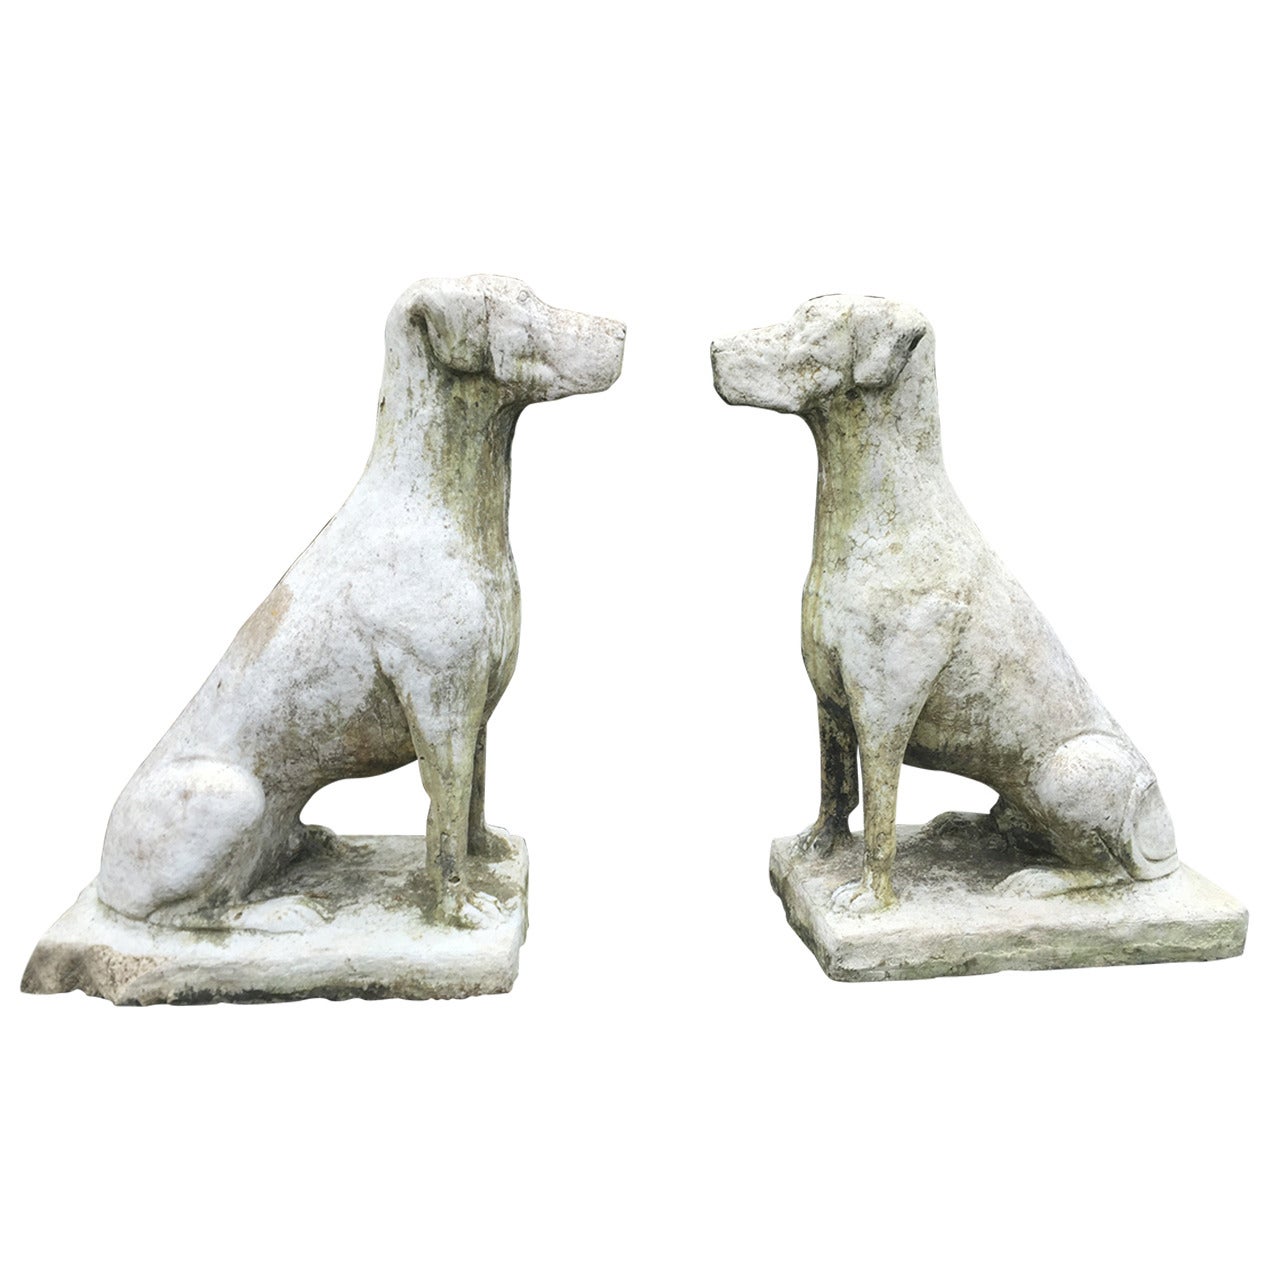 Huge Pair of English Sentry Dog Statues